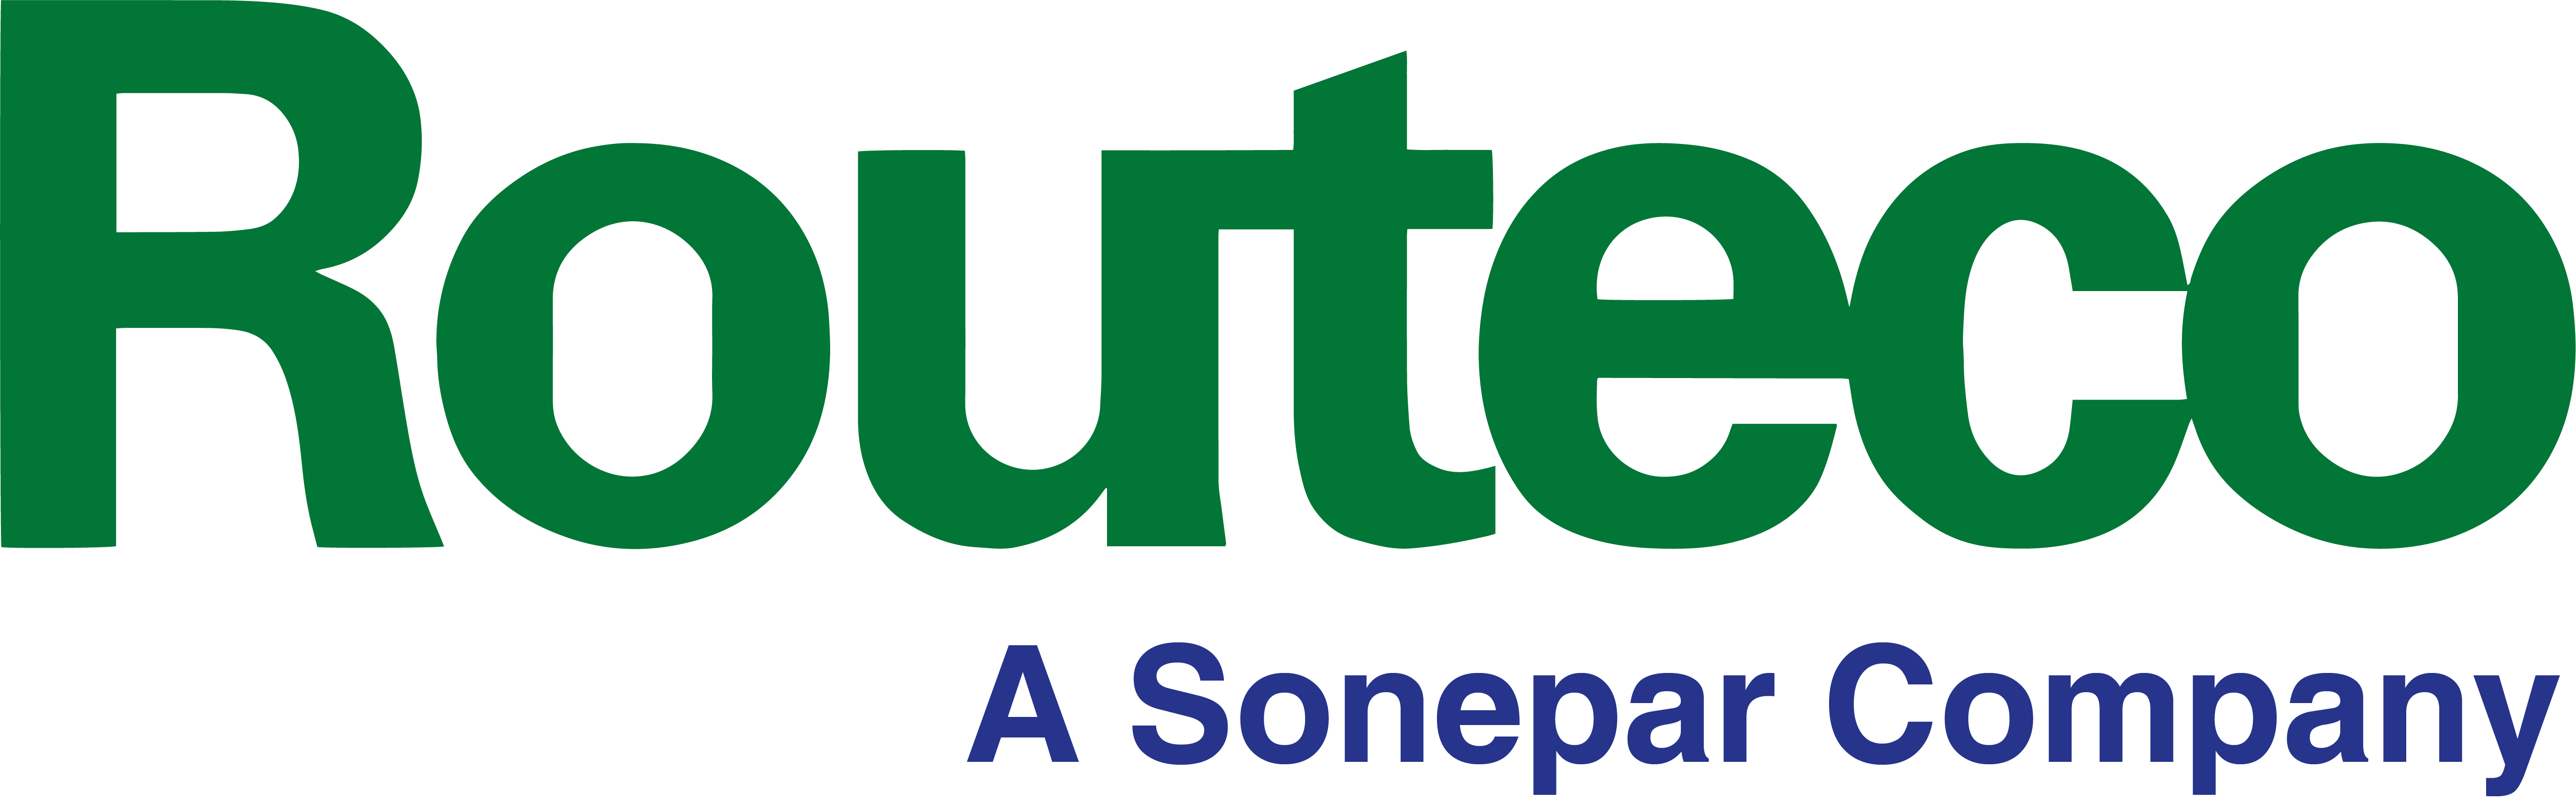 Routeco announce a new UK acquisition_img